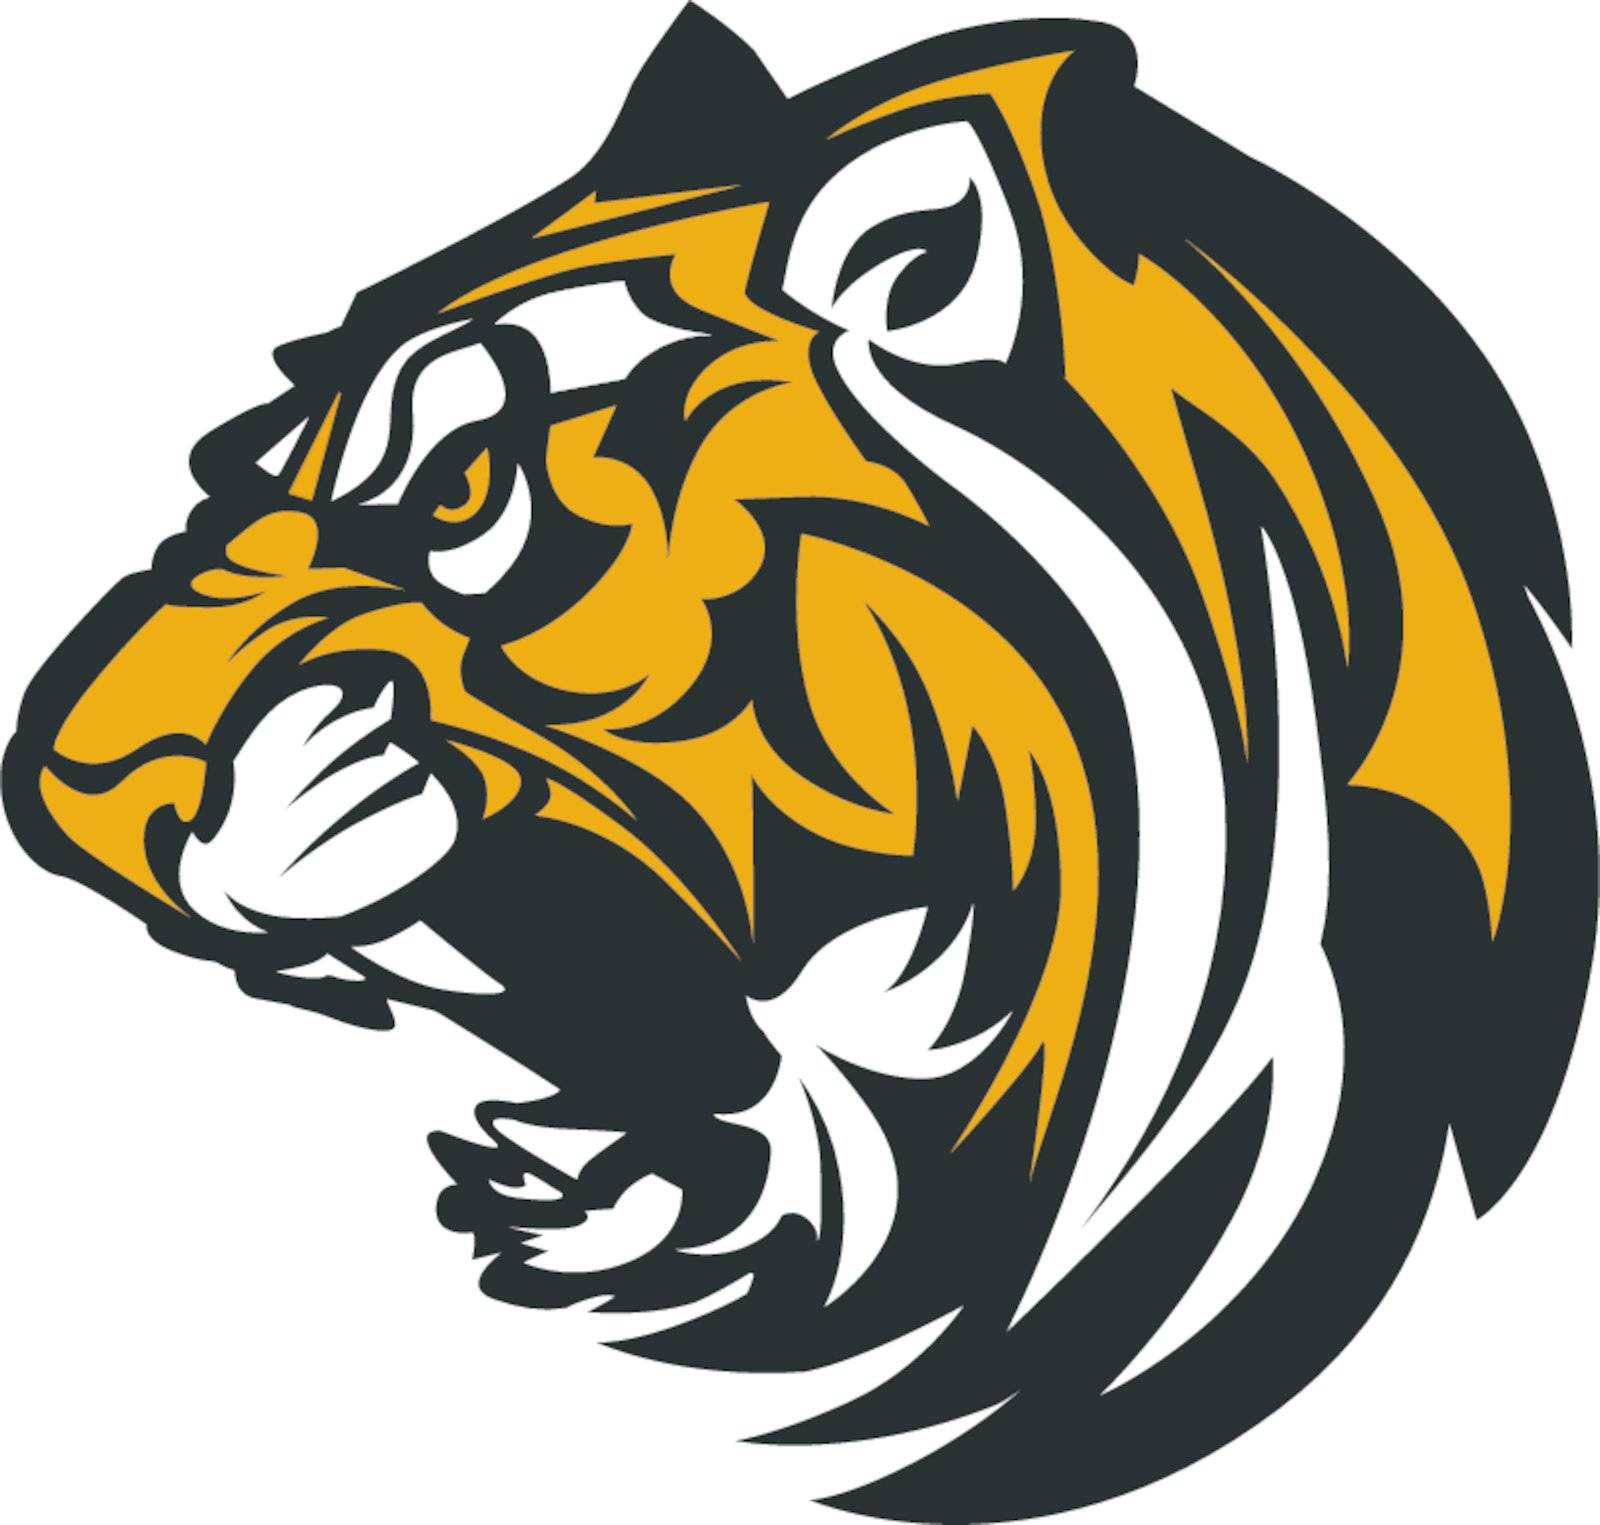 Graphic Team Mascot Image of  a Growling Tiger Head